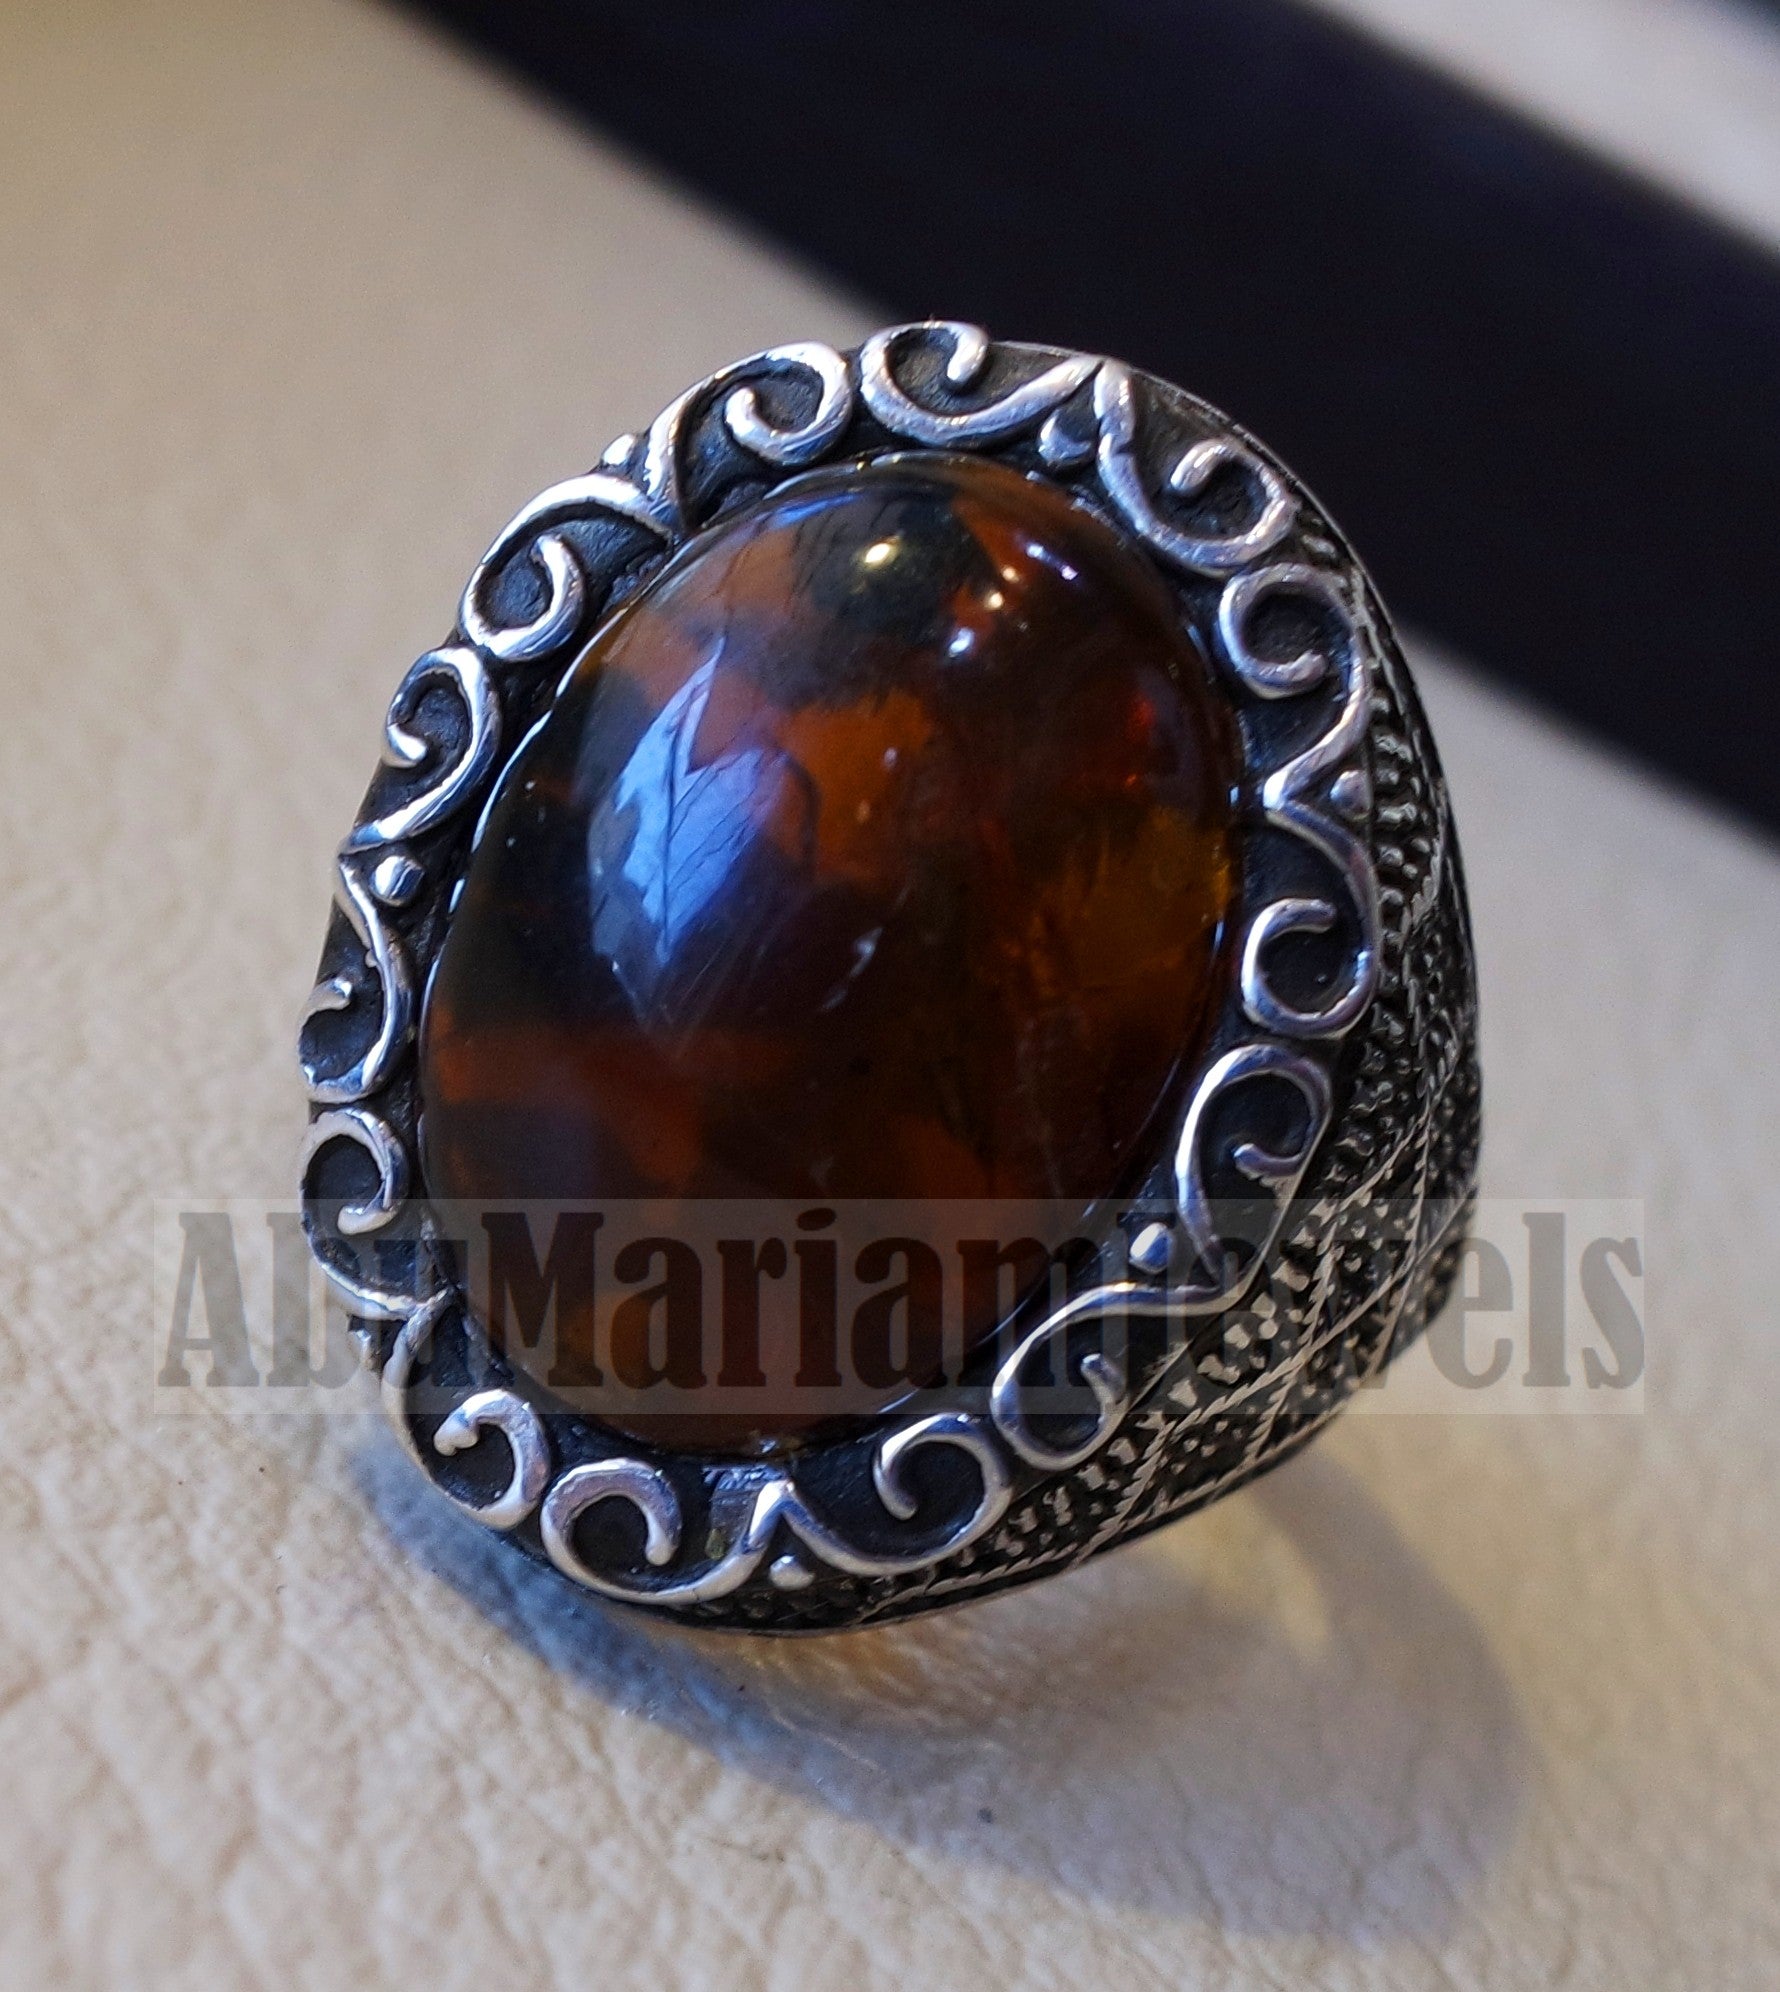 Baltic amber oval stone man heavy ring sterling silver 925 antique ottoman style jewelry all sizes fast shipping natural genuine stone كهرب